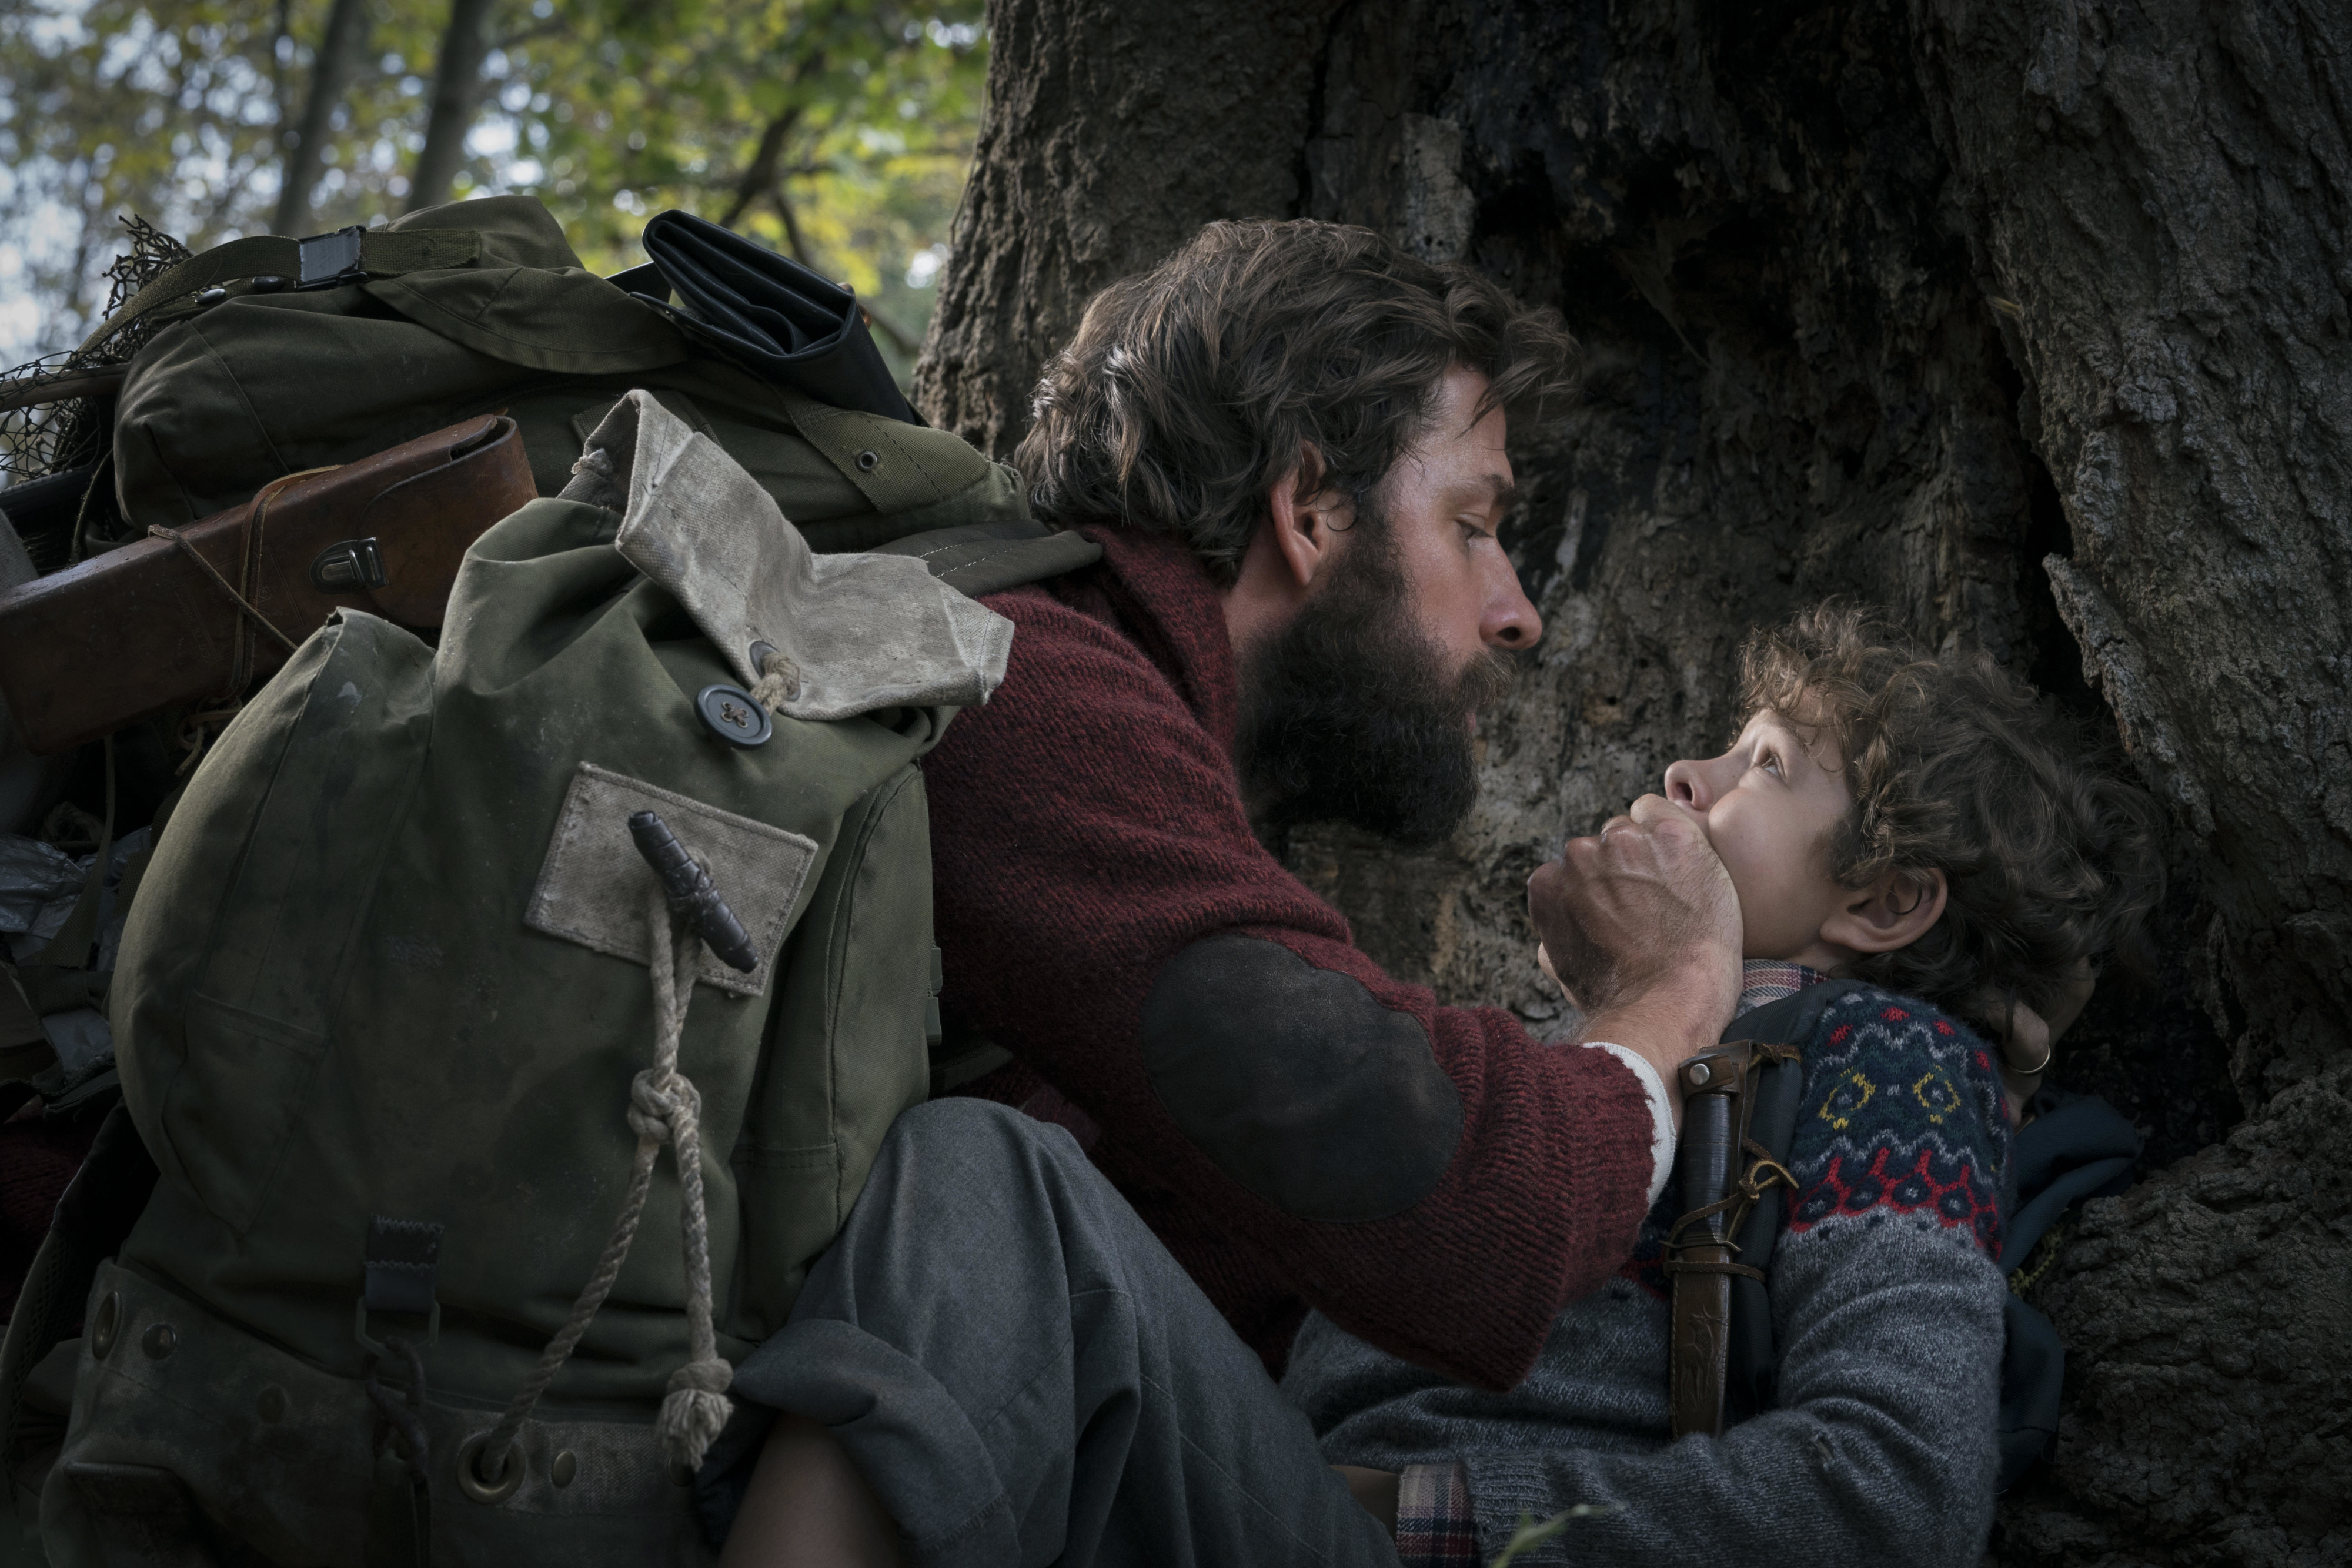 Movie A Quiet Place HD Wallpaper | Background Image